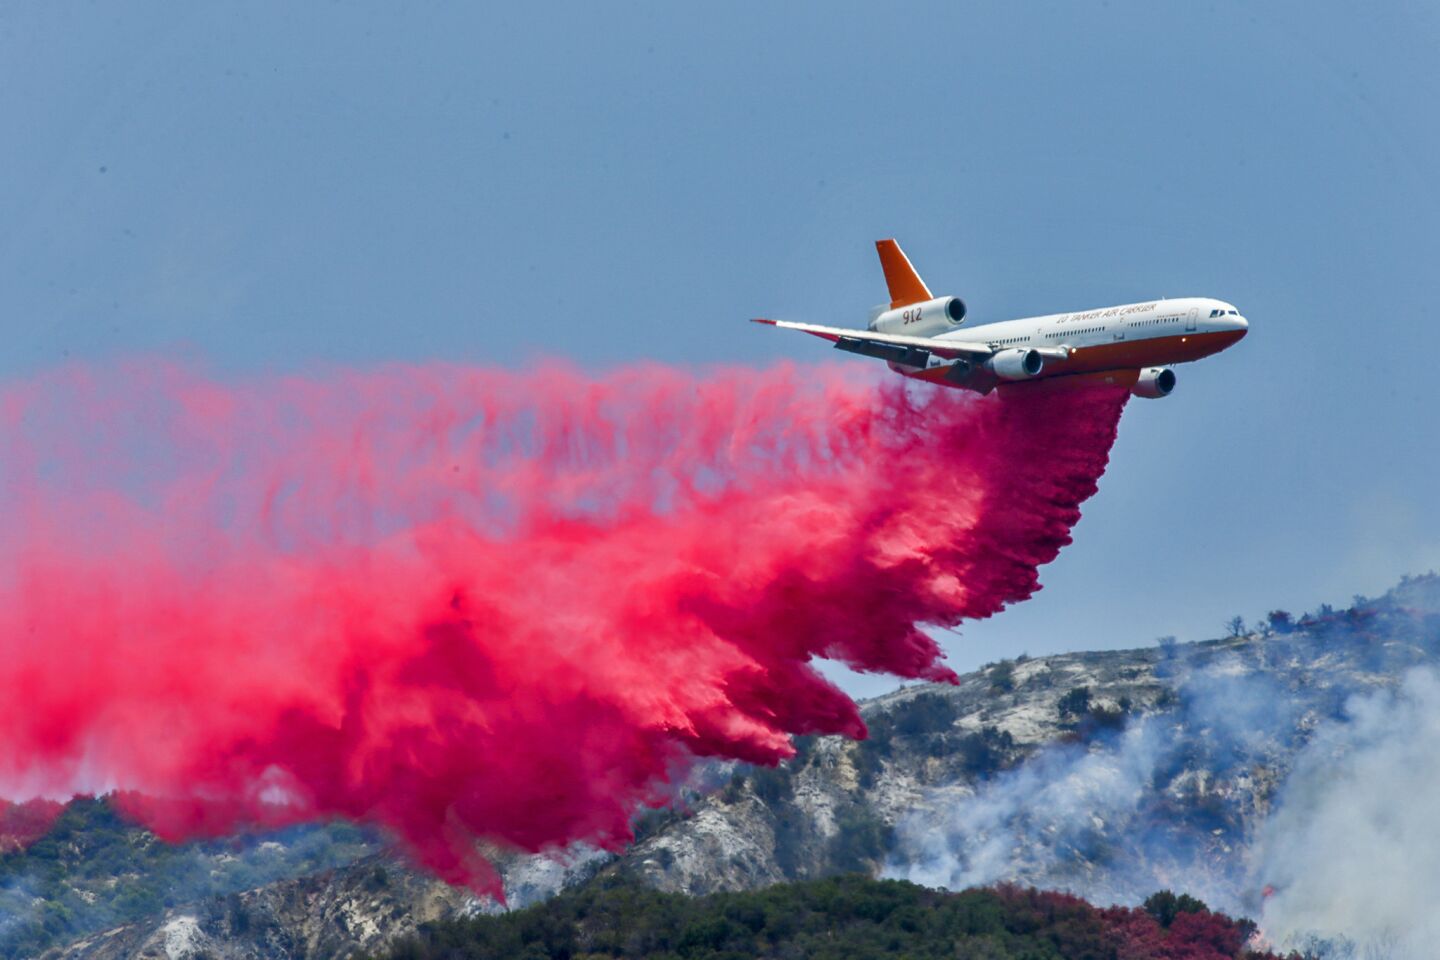 A DC-10 air tanker drops Phos-Chek, a fire retardant, on the Fish fire in Duarte on June 22.